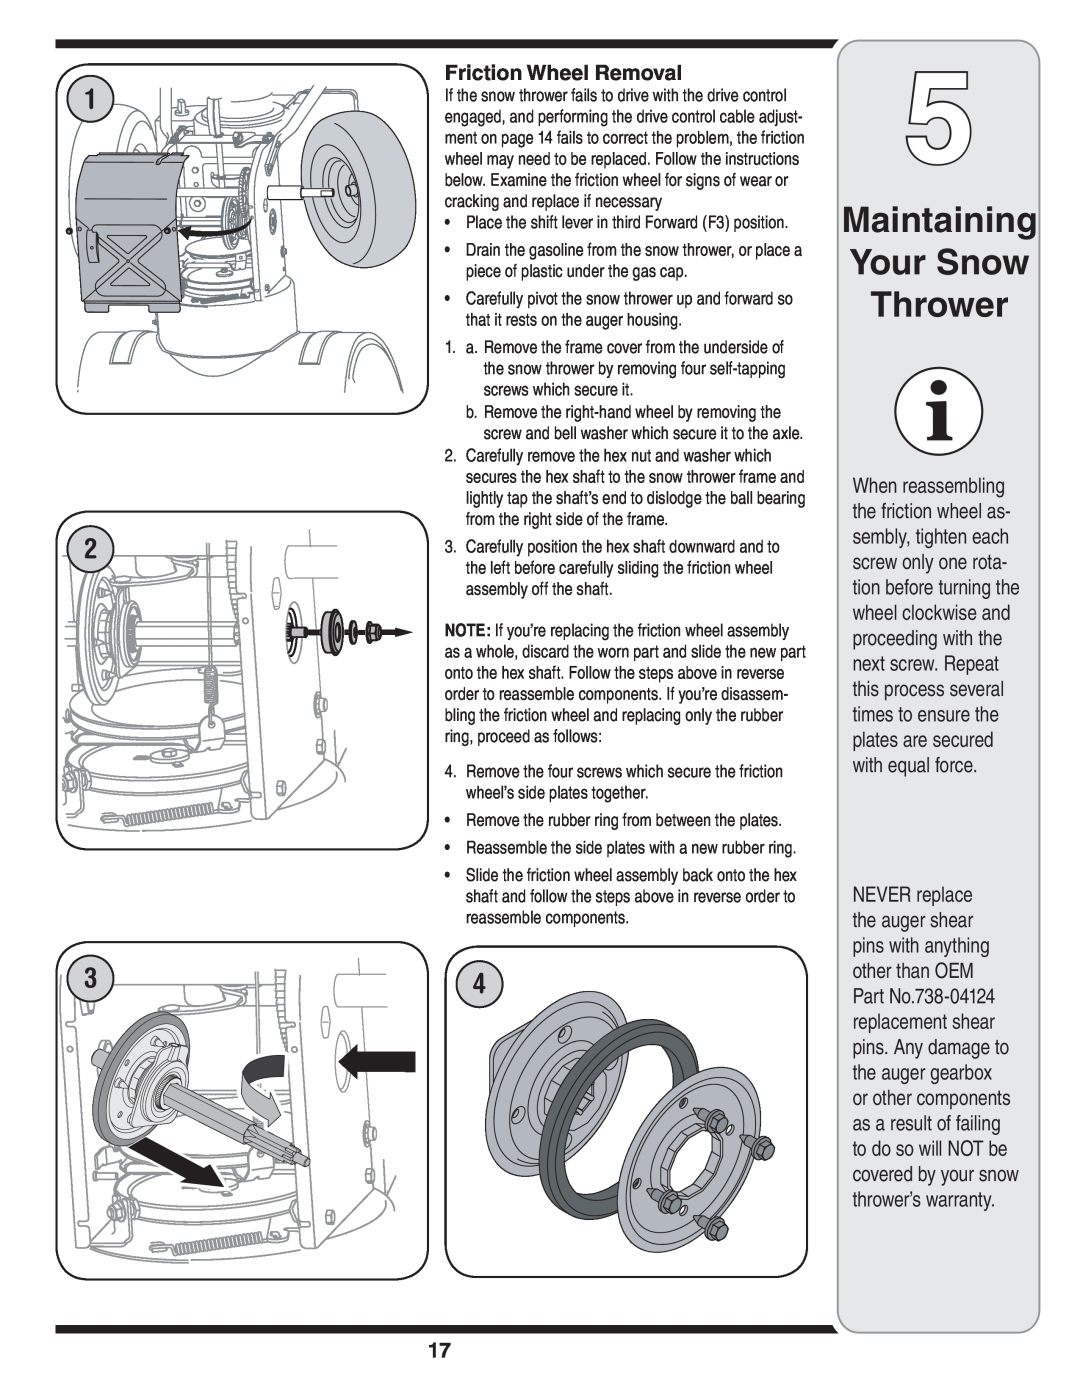 MTD C Style Maintaining Your Snow Thrower, Friction Wheel Removal, Reassemble the side plates with a new rubber ring 